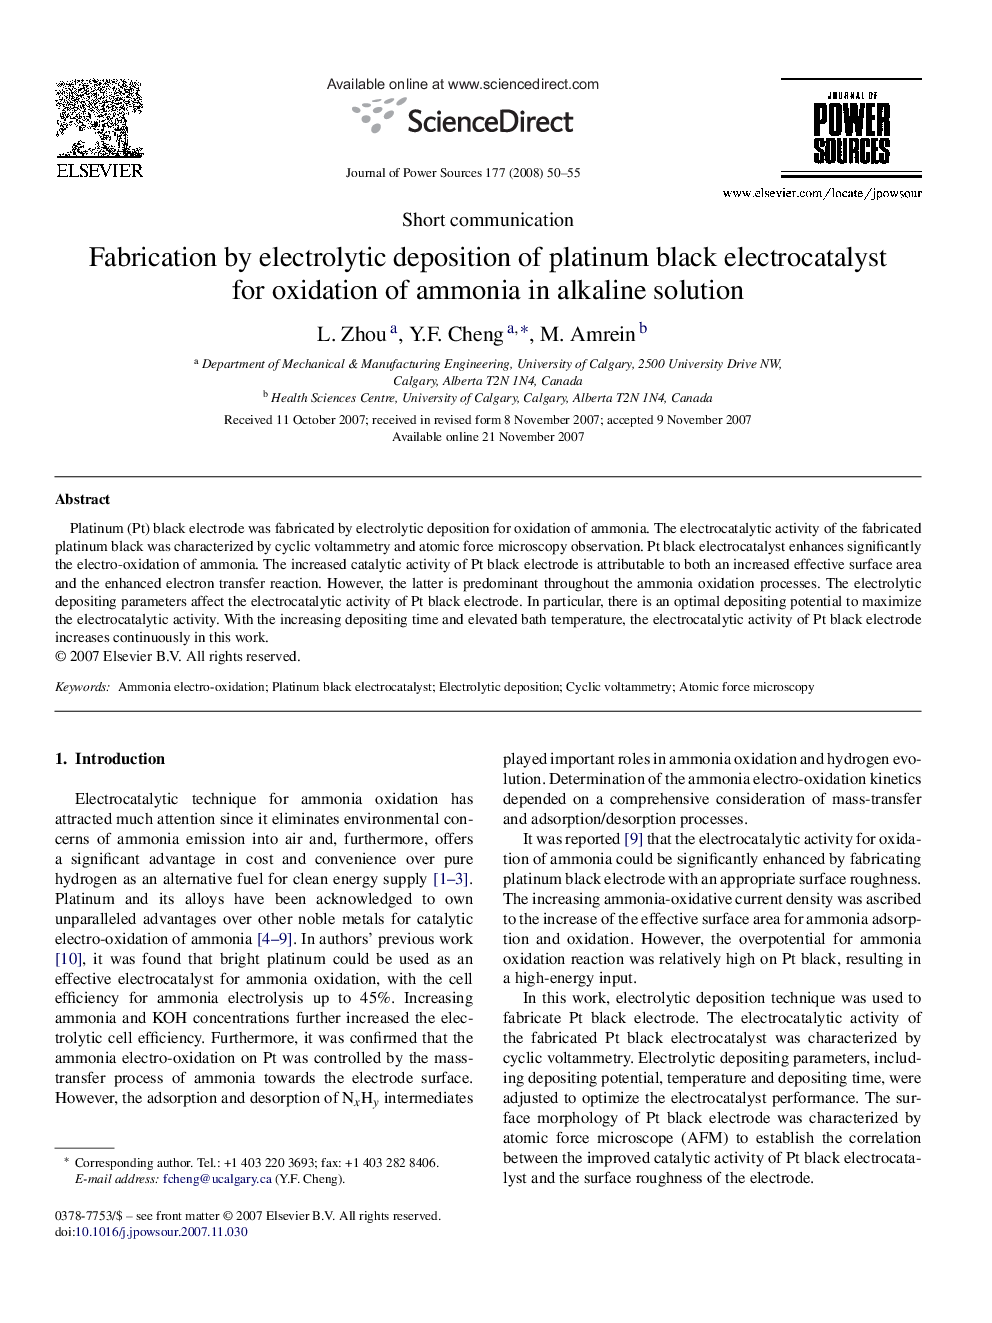 Fabrication by electrolytic deposition of platinum black electrocatalyst for oxidation of ammonia in alkaline solution